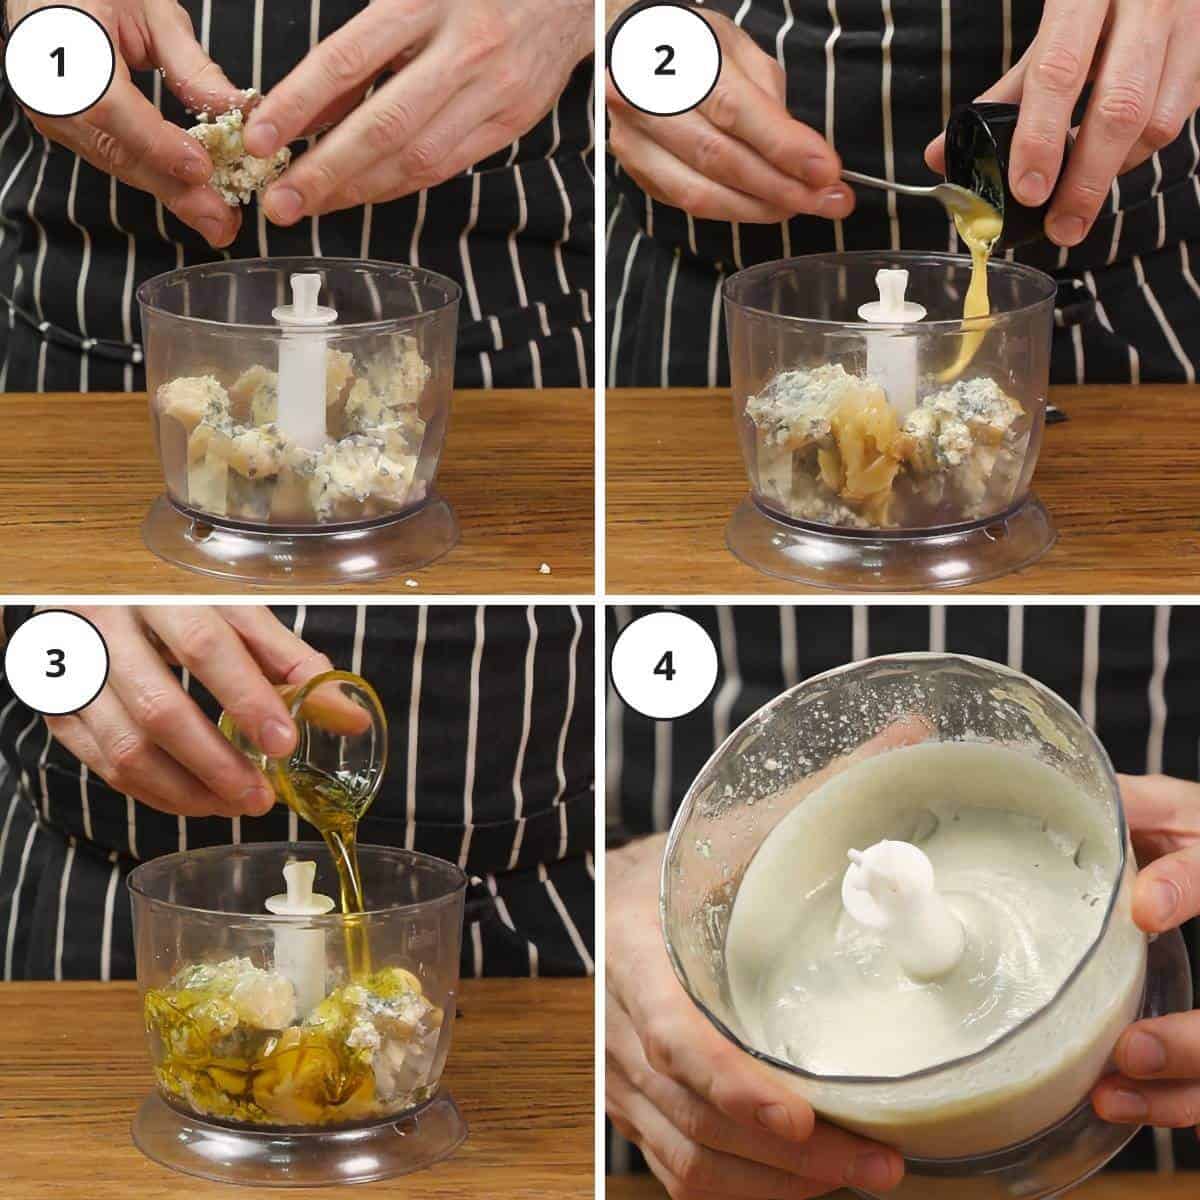 Picture steps for making blue cheese dressing.